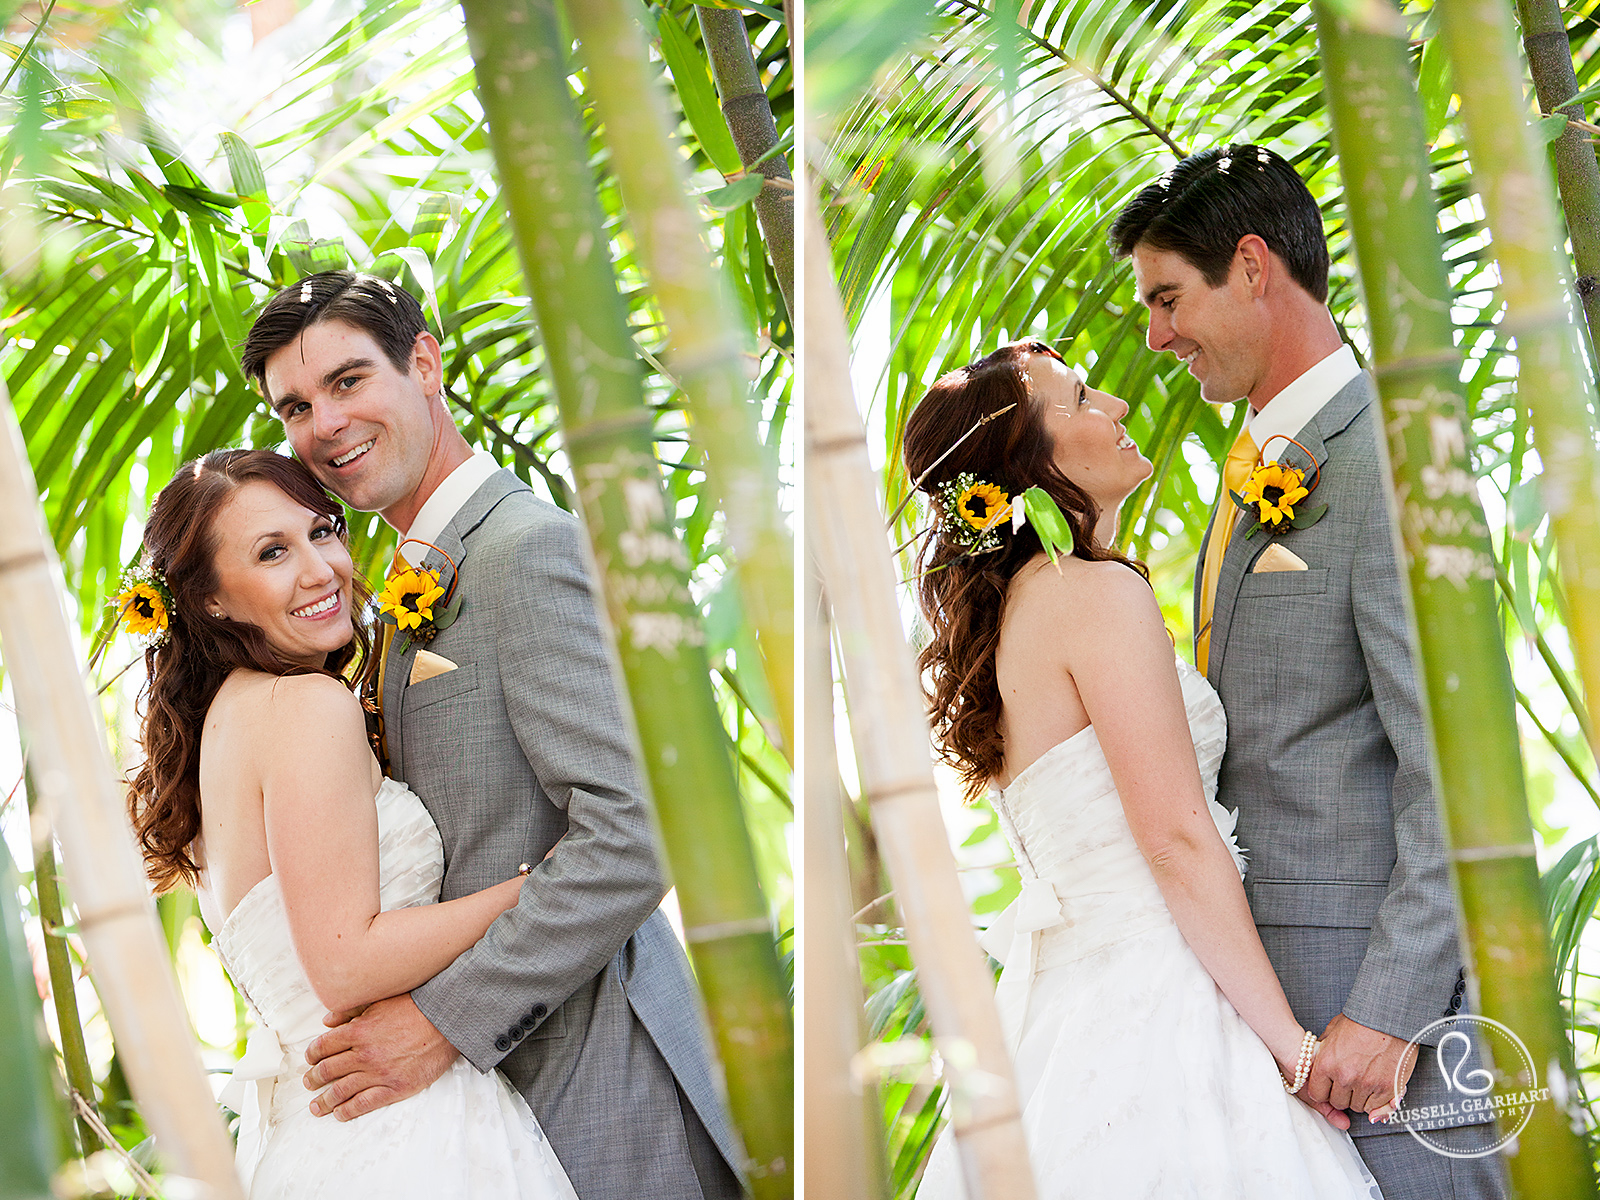 Bride and Groom Portraits in Bamboo - Sunny Outdoor Southern California Wedding – Russell Gearhart Photography – www.gearhartphoto.com